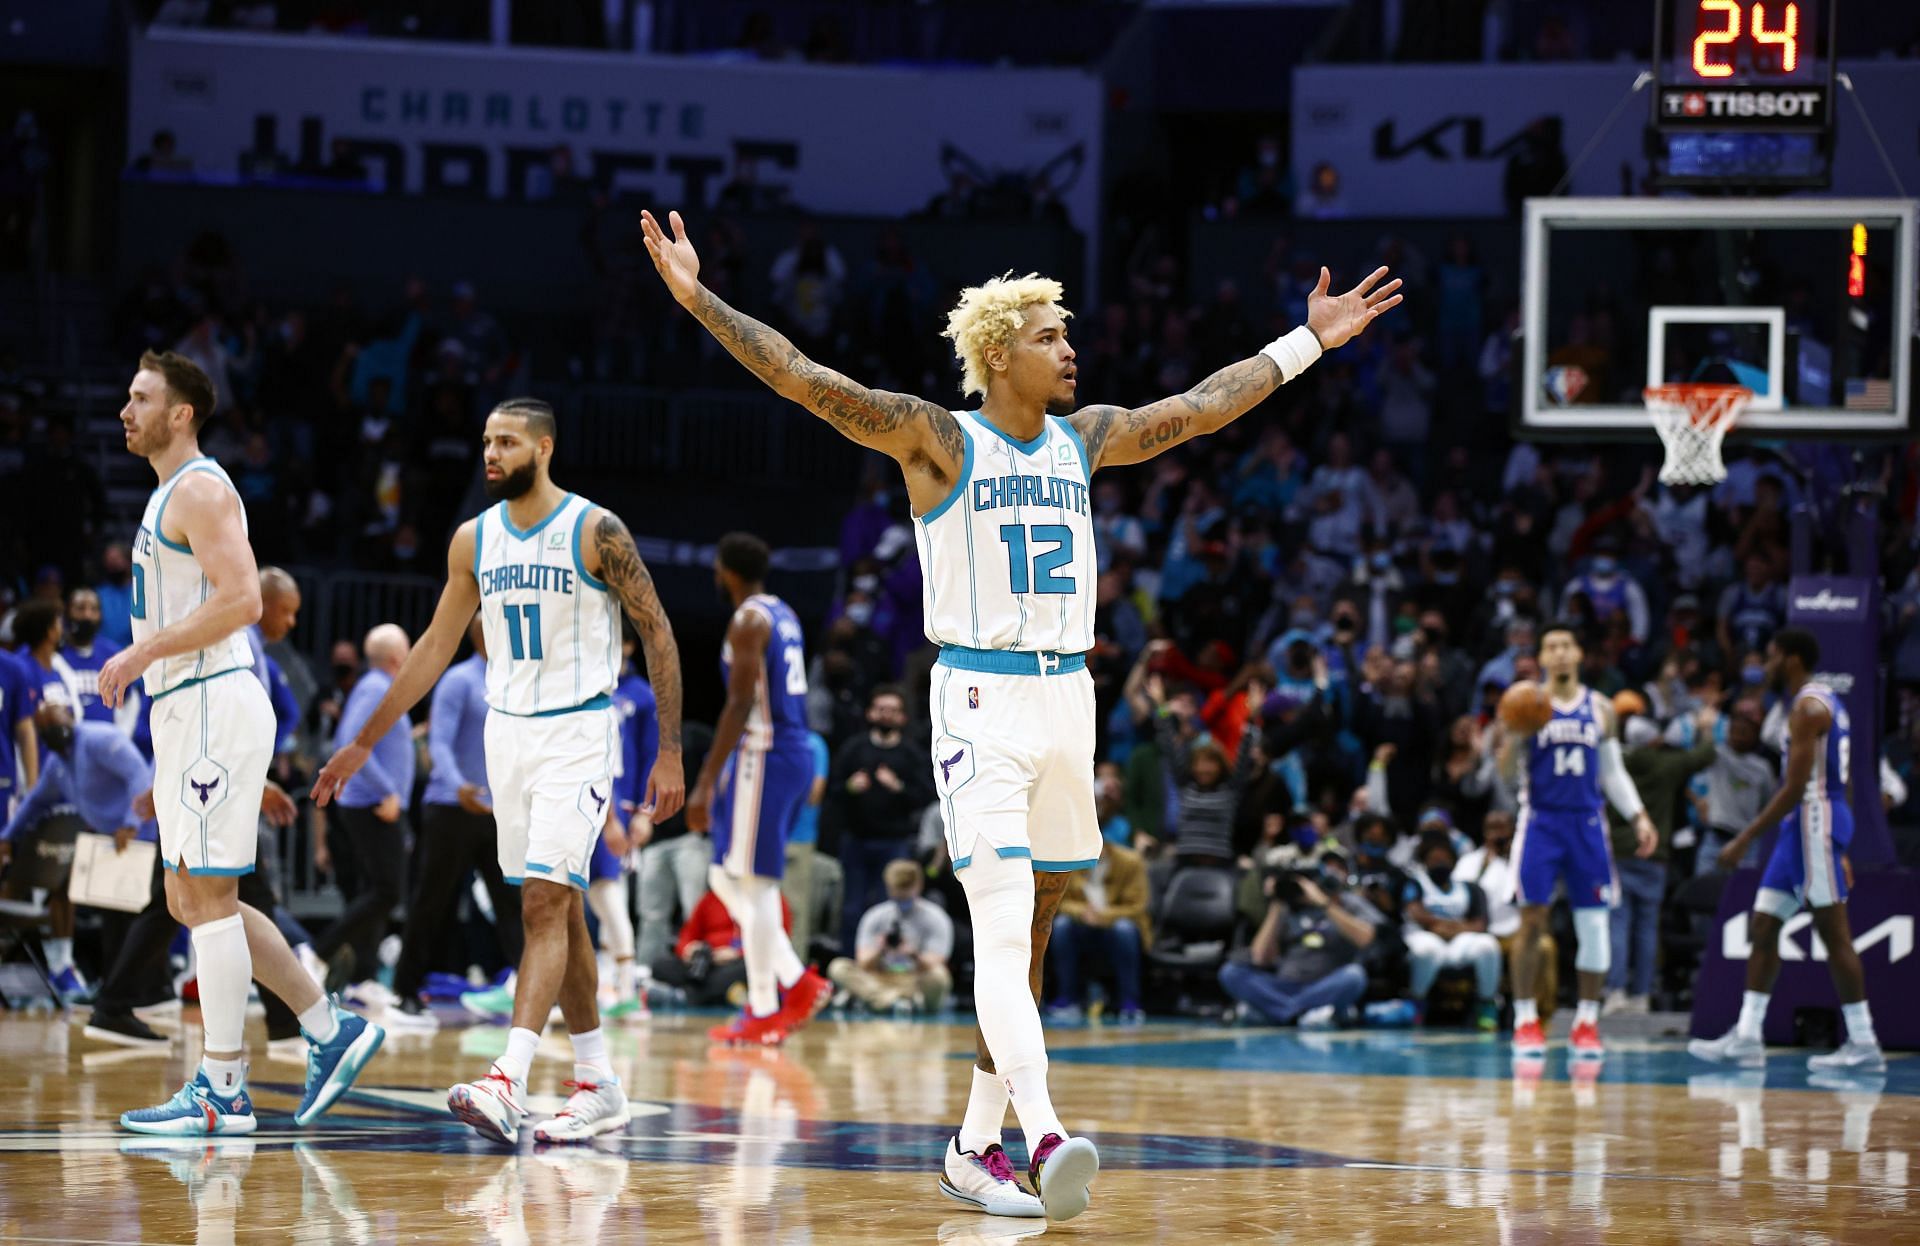 The 76ers and the Hornets will face off on Friday.